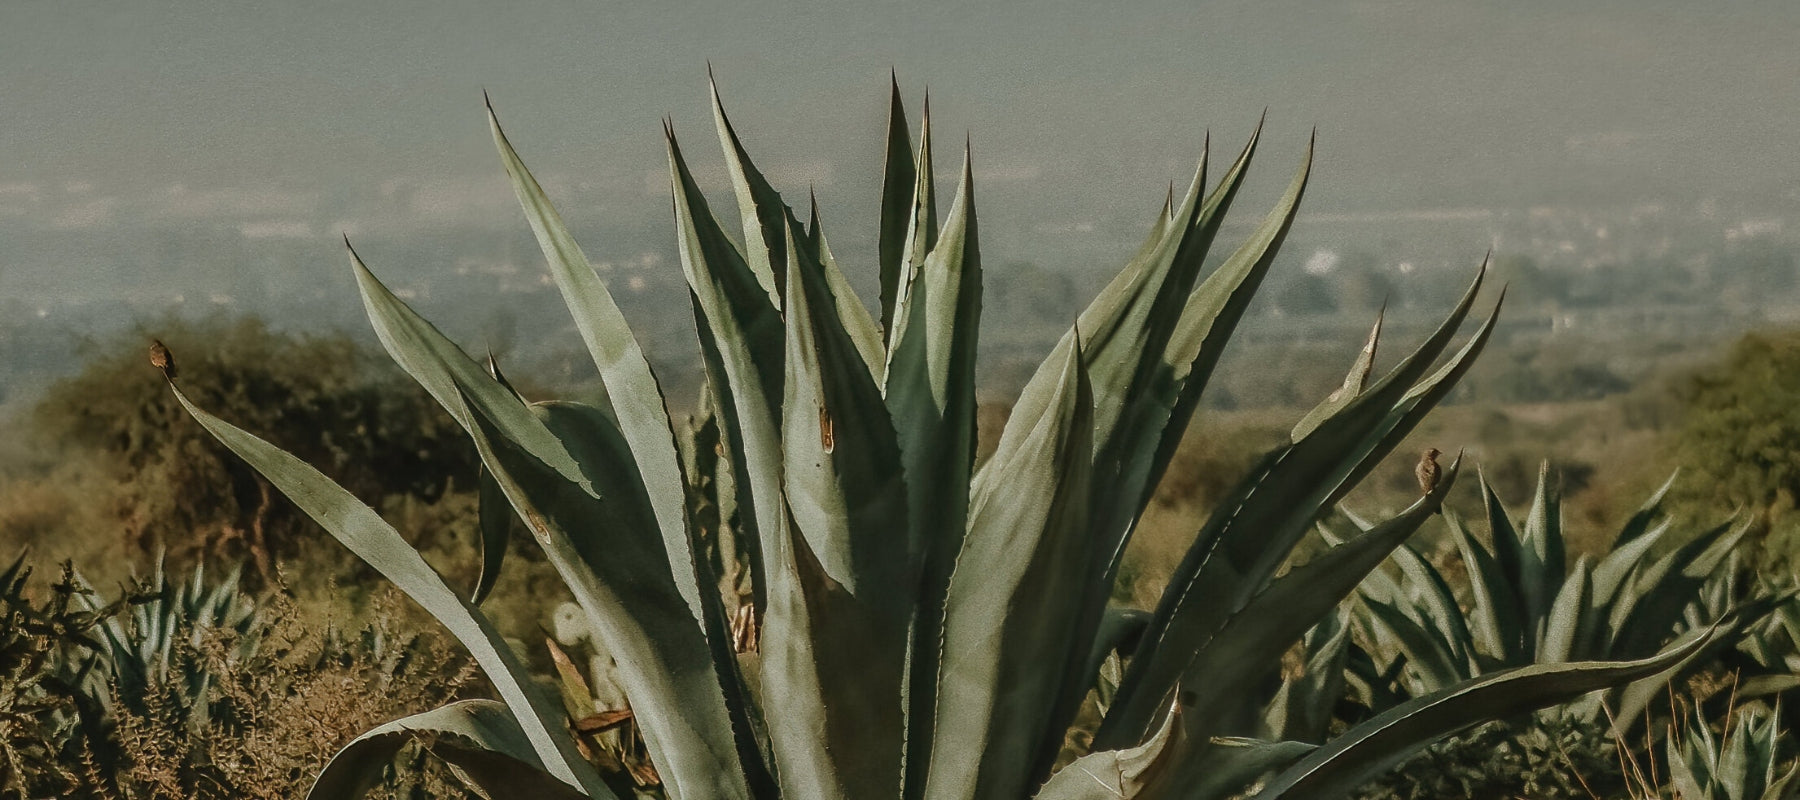 Agave graphic created for Mesa Mezcal branding.